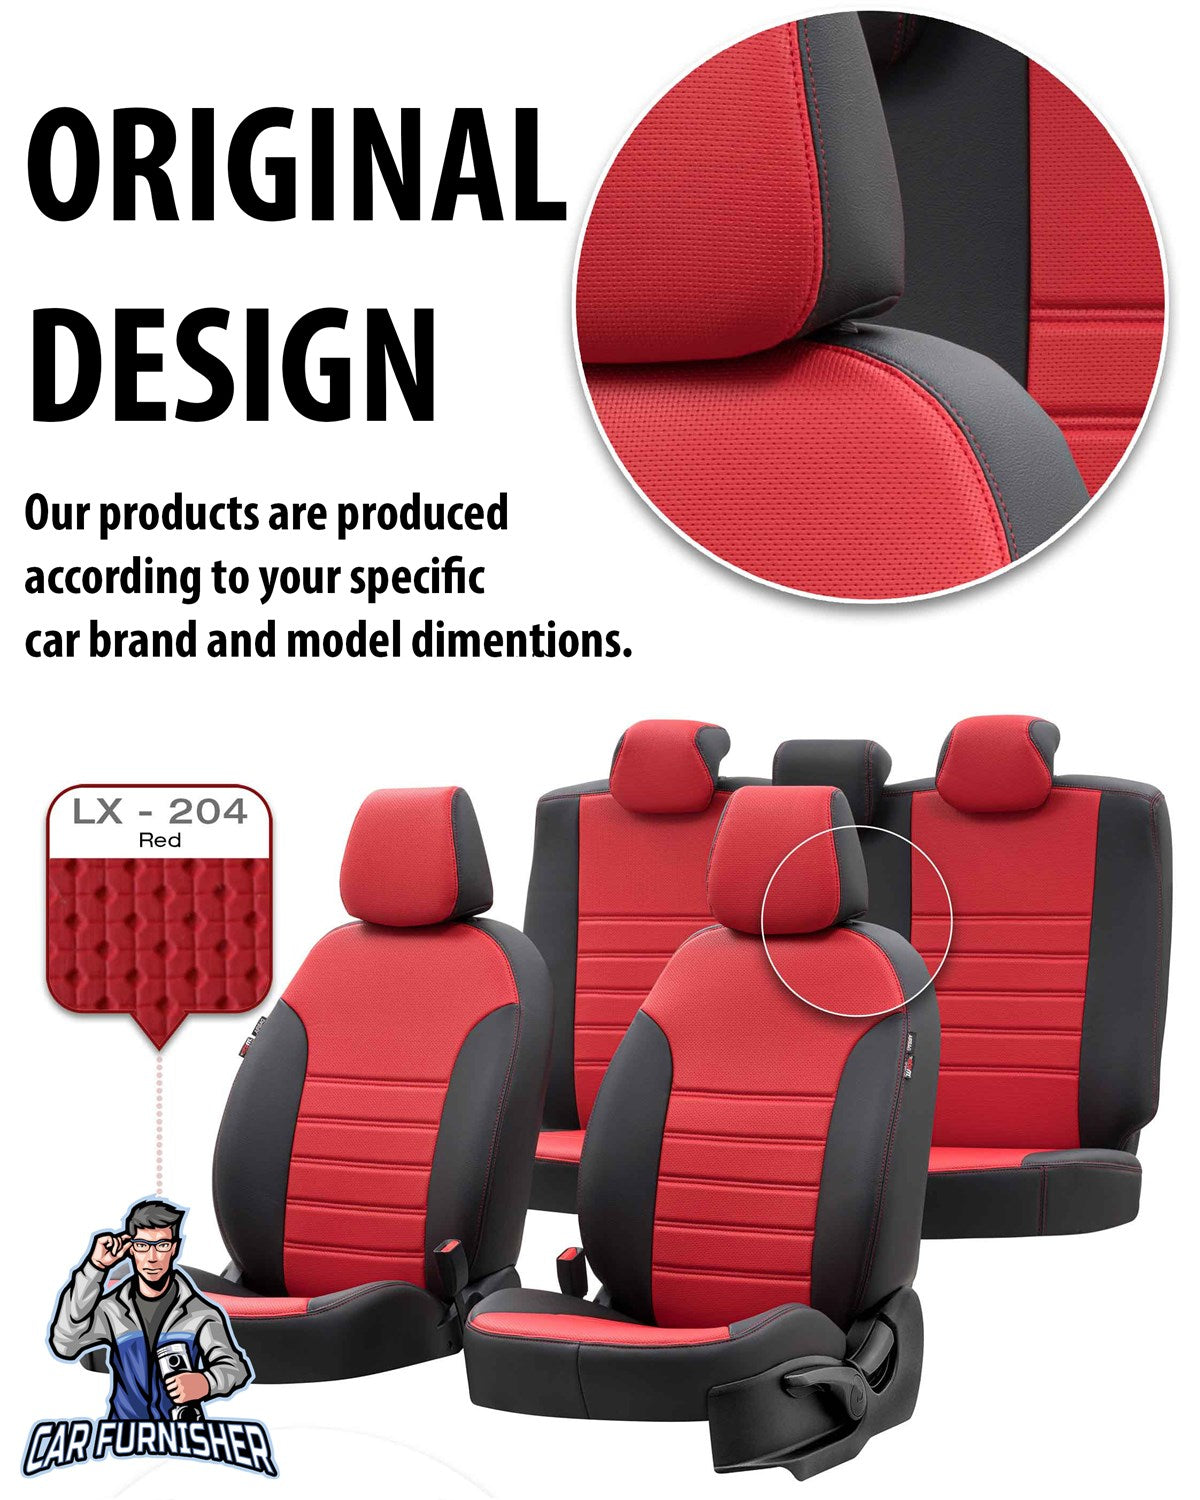 Chevrolet Cruze Car Seat Covers 2009-2016 New York Design Red Full Set (5 Seats + Handrest) Leather & Fabric